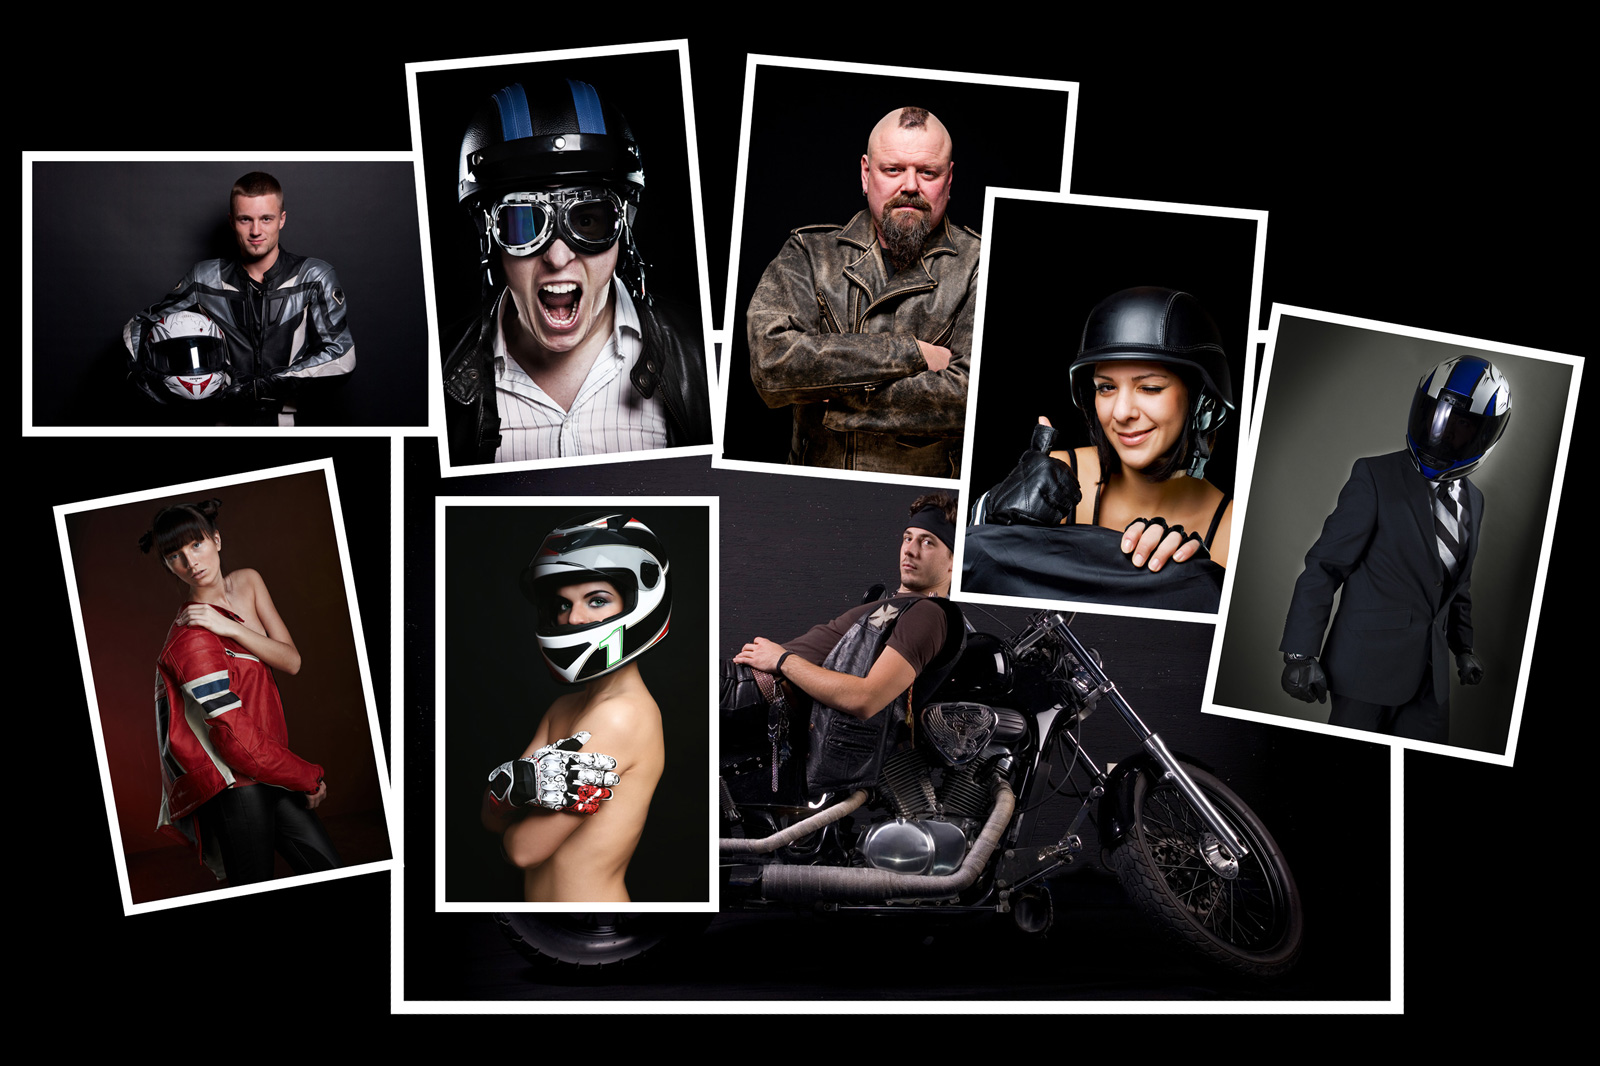 Image manipulation - bikers campaign 1 initial photos